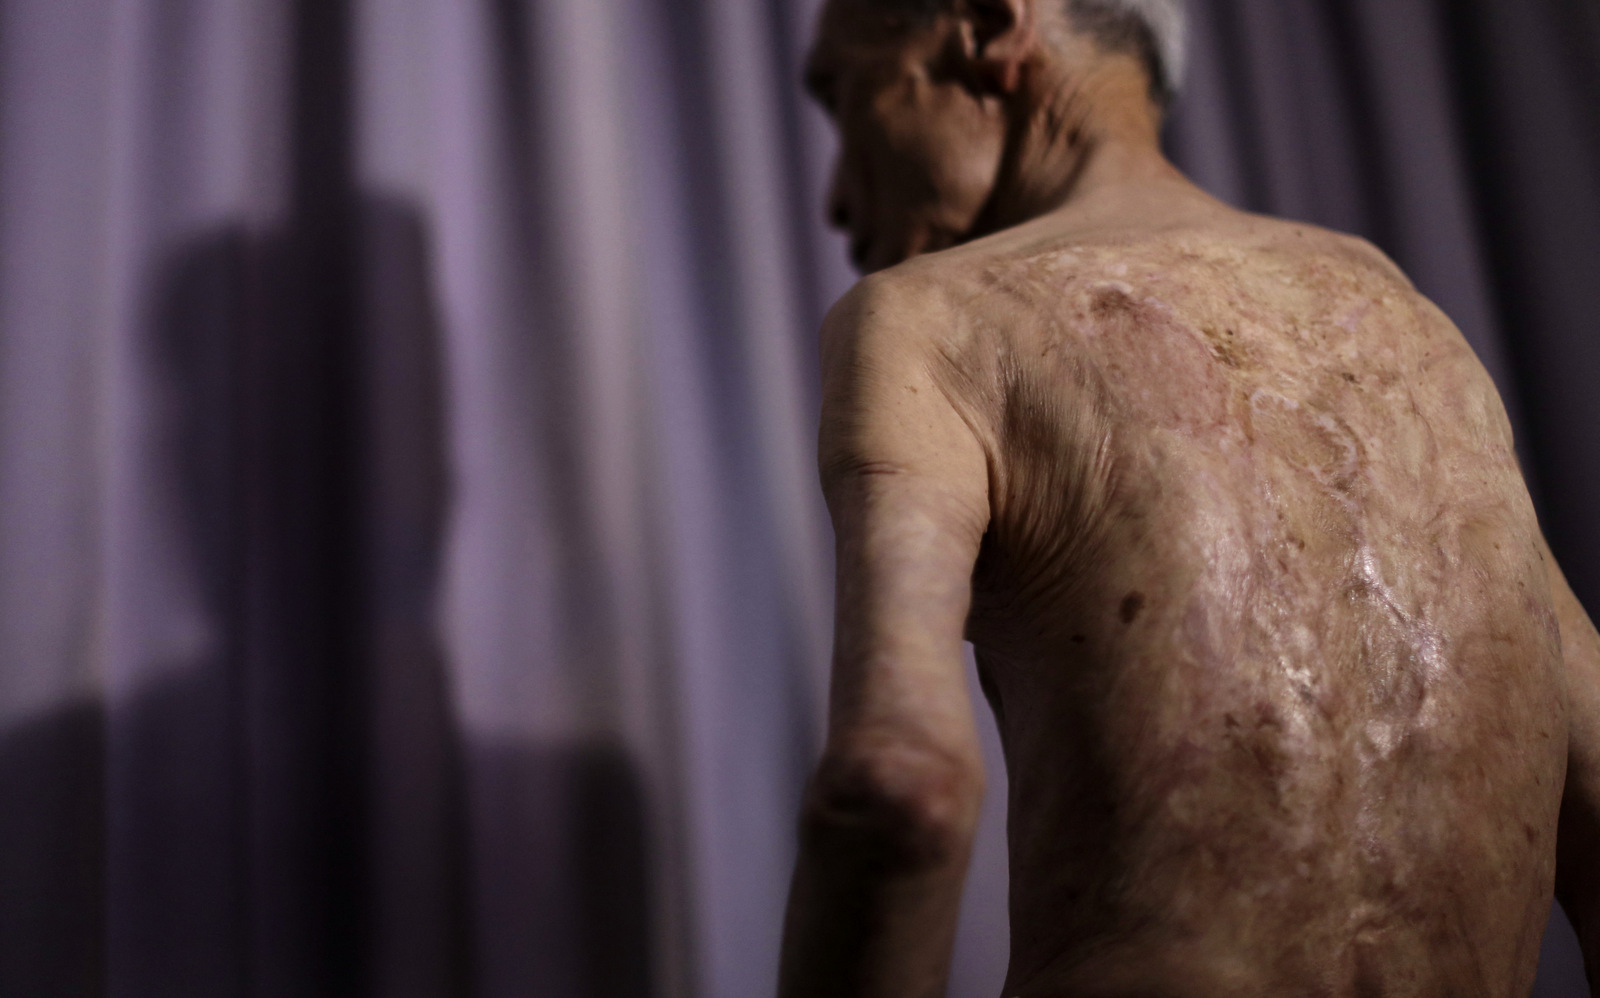 Sumiteru Taniguchi, a survivor of the 1945 atomic bombing of Nagasaki, shows his back with scars of burns from the atomic bomb explosion, during an interview at his office in Nagasaki, southern Japan, June 30, 2015. (AP/Eugene Hoshiko)